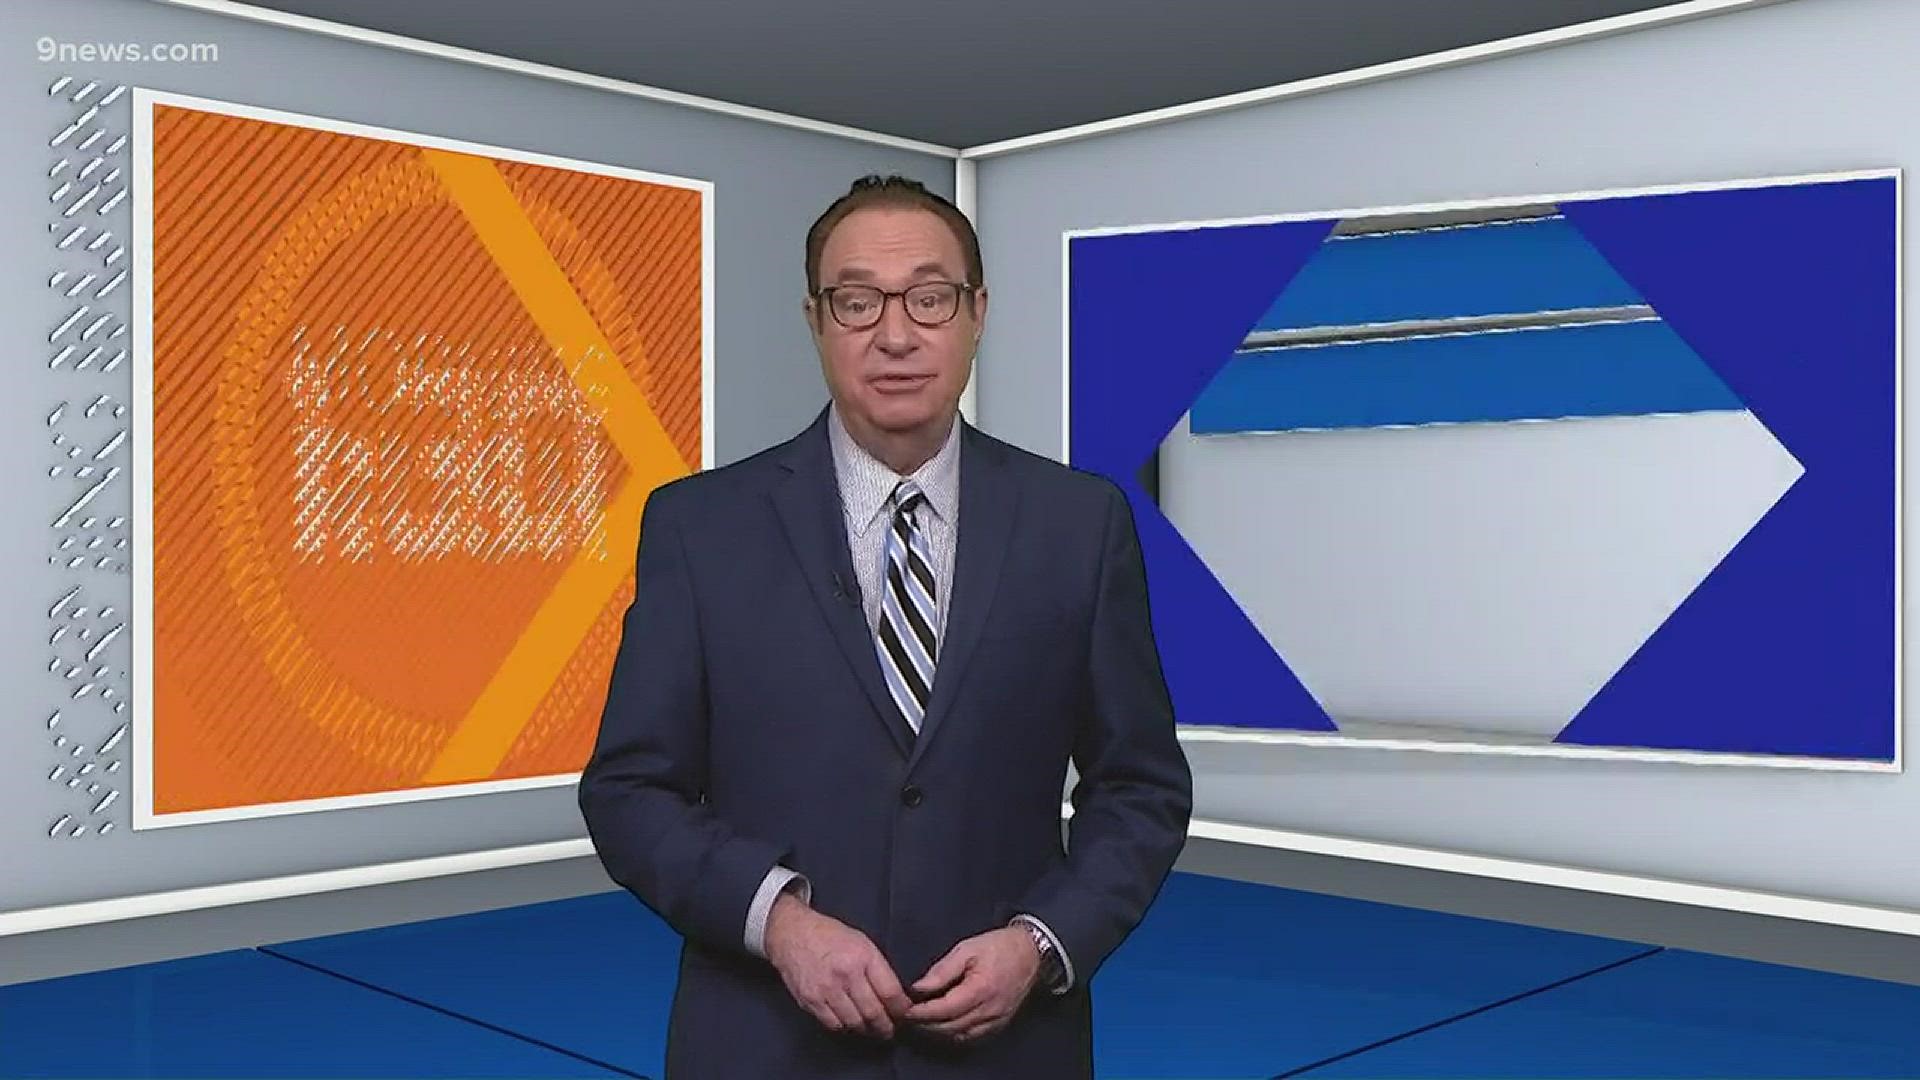 The top headlines and weather for Wednesday morning, February 6, 2019